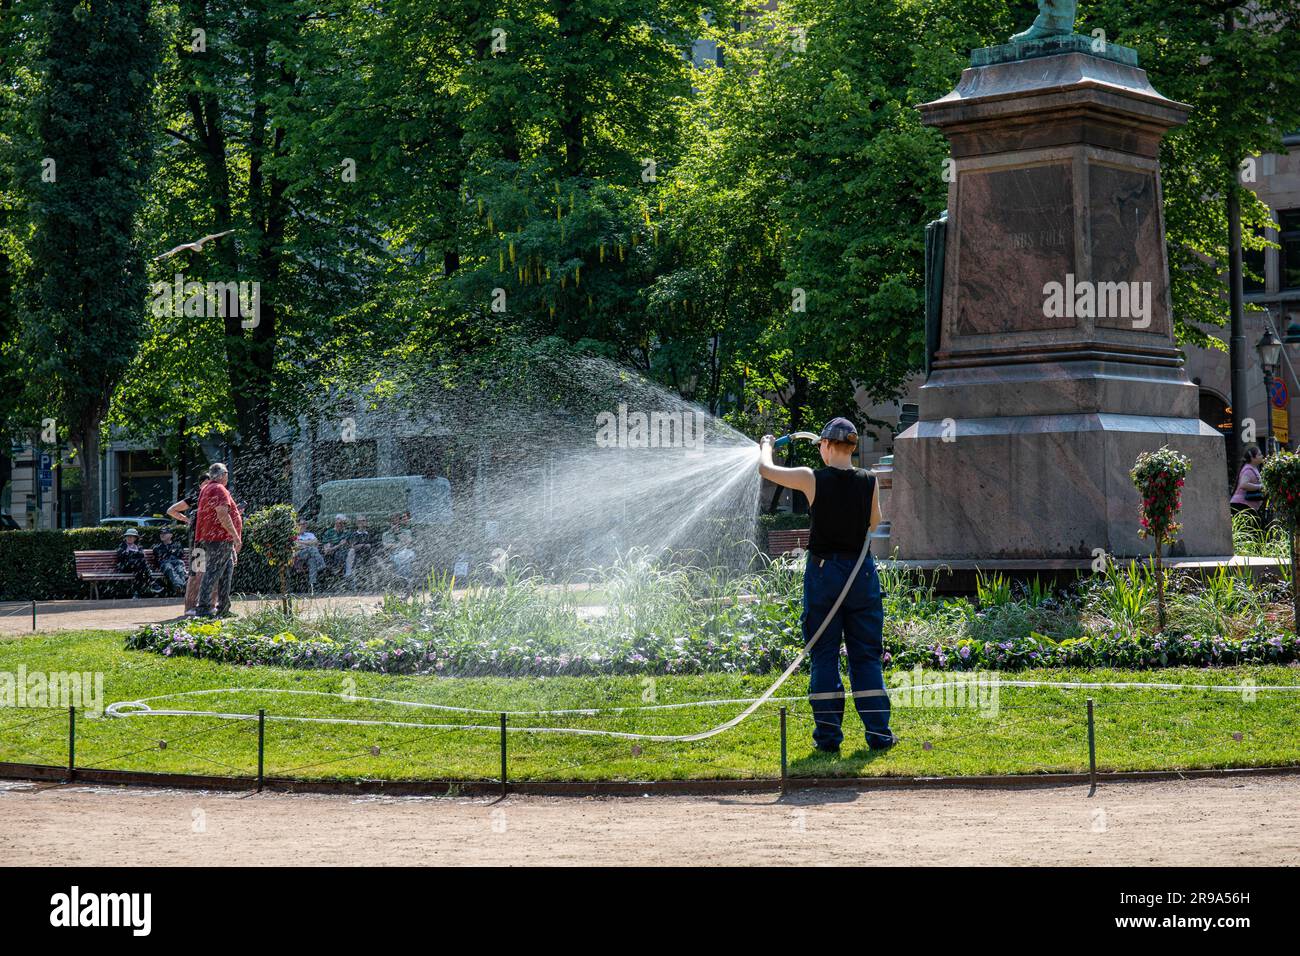 Park maintenance worker watering grass and plants on a sunny summer day at Esplanade Park in Helsinki, Finland Stock Photo